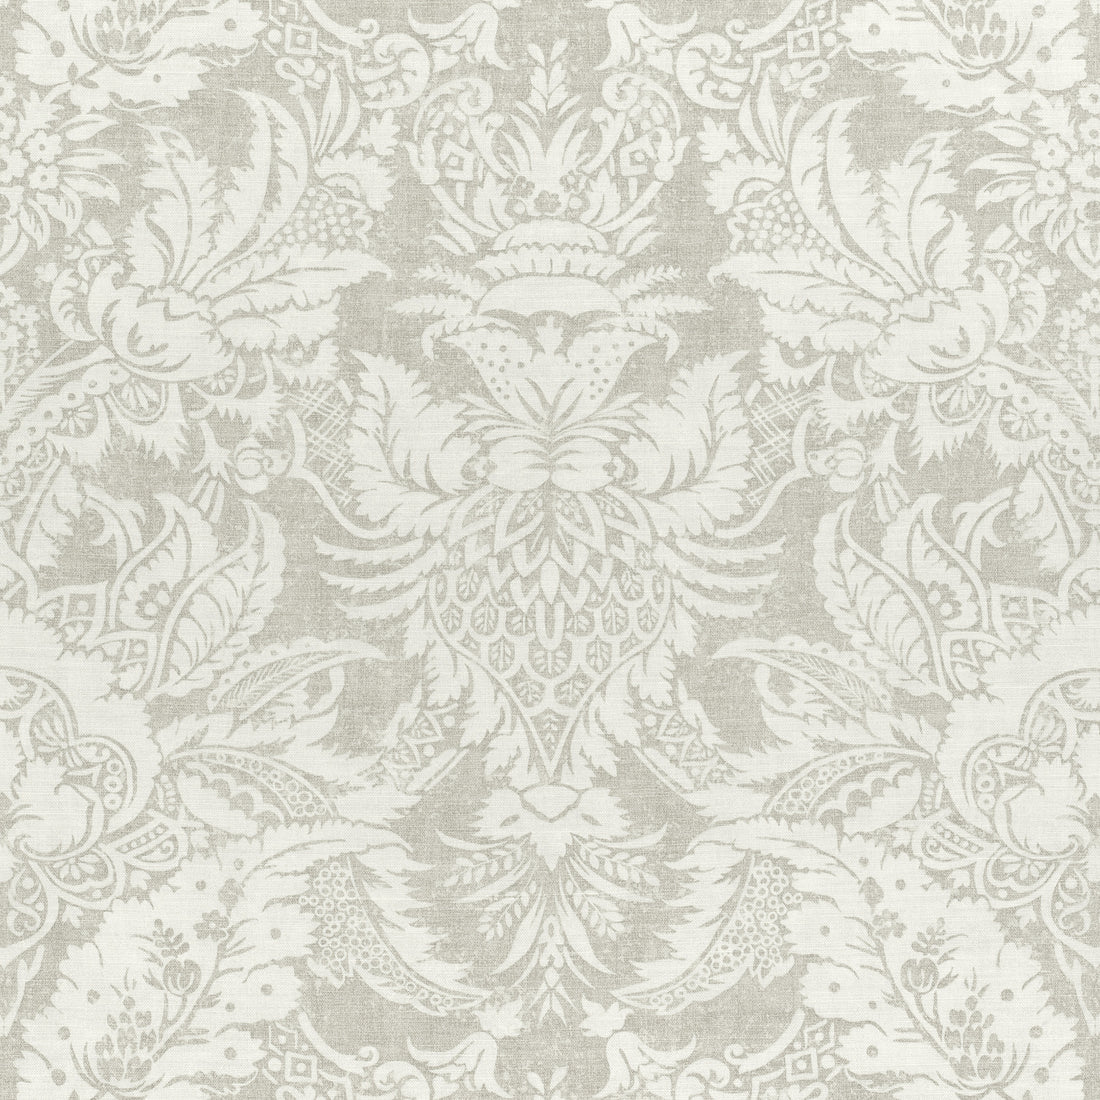 Chardonnet Damask fabric in grey color - pattern number F972582 - by Thibaut in the Chestnut Hill collection